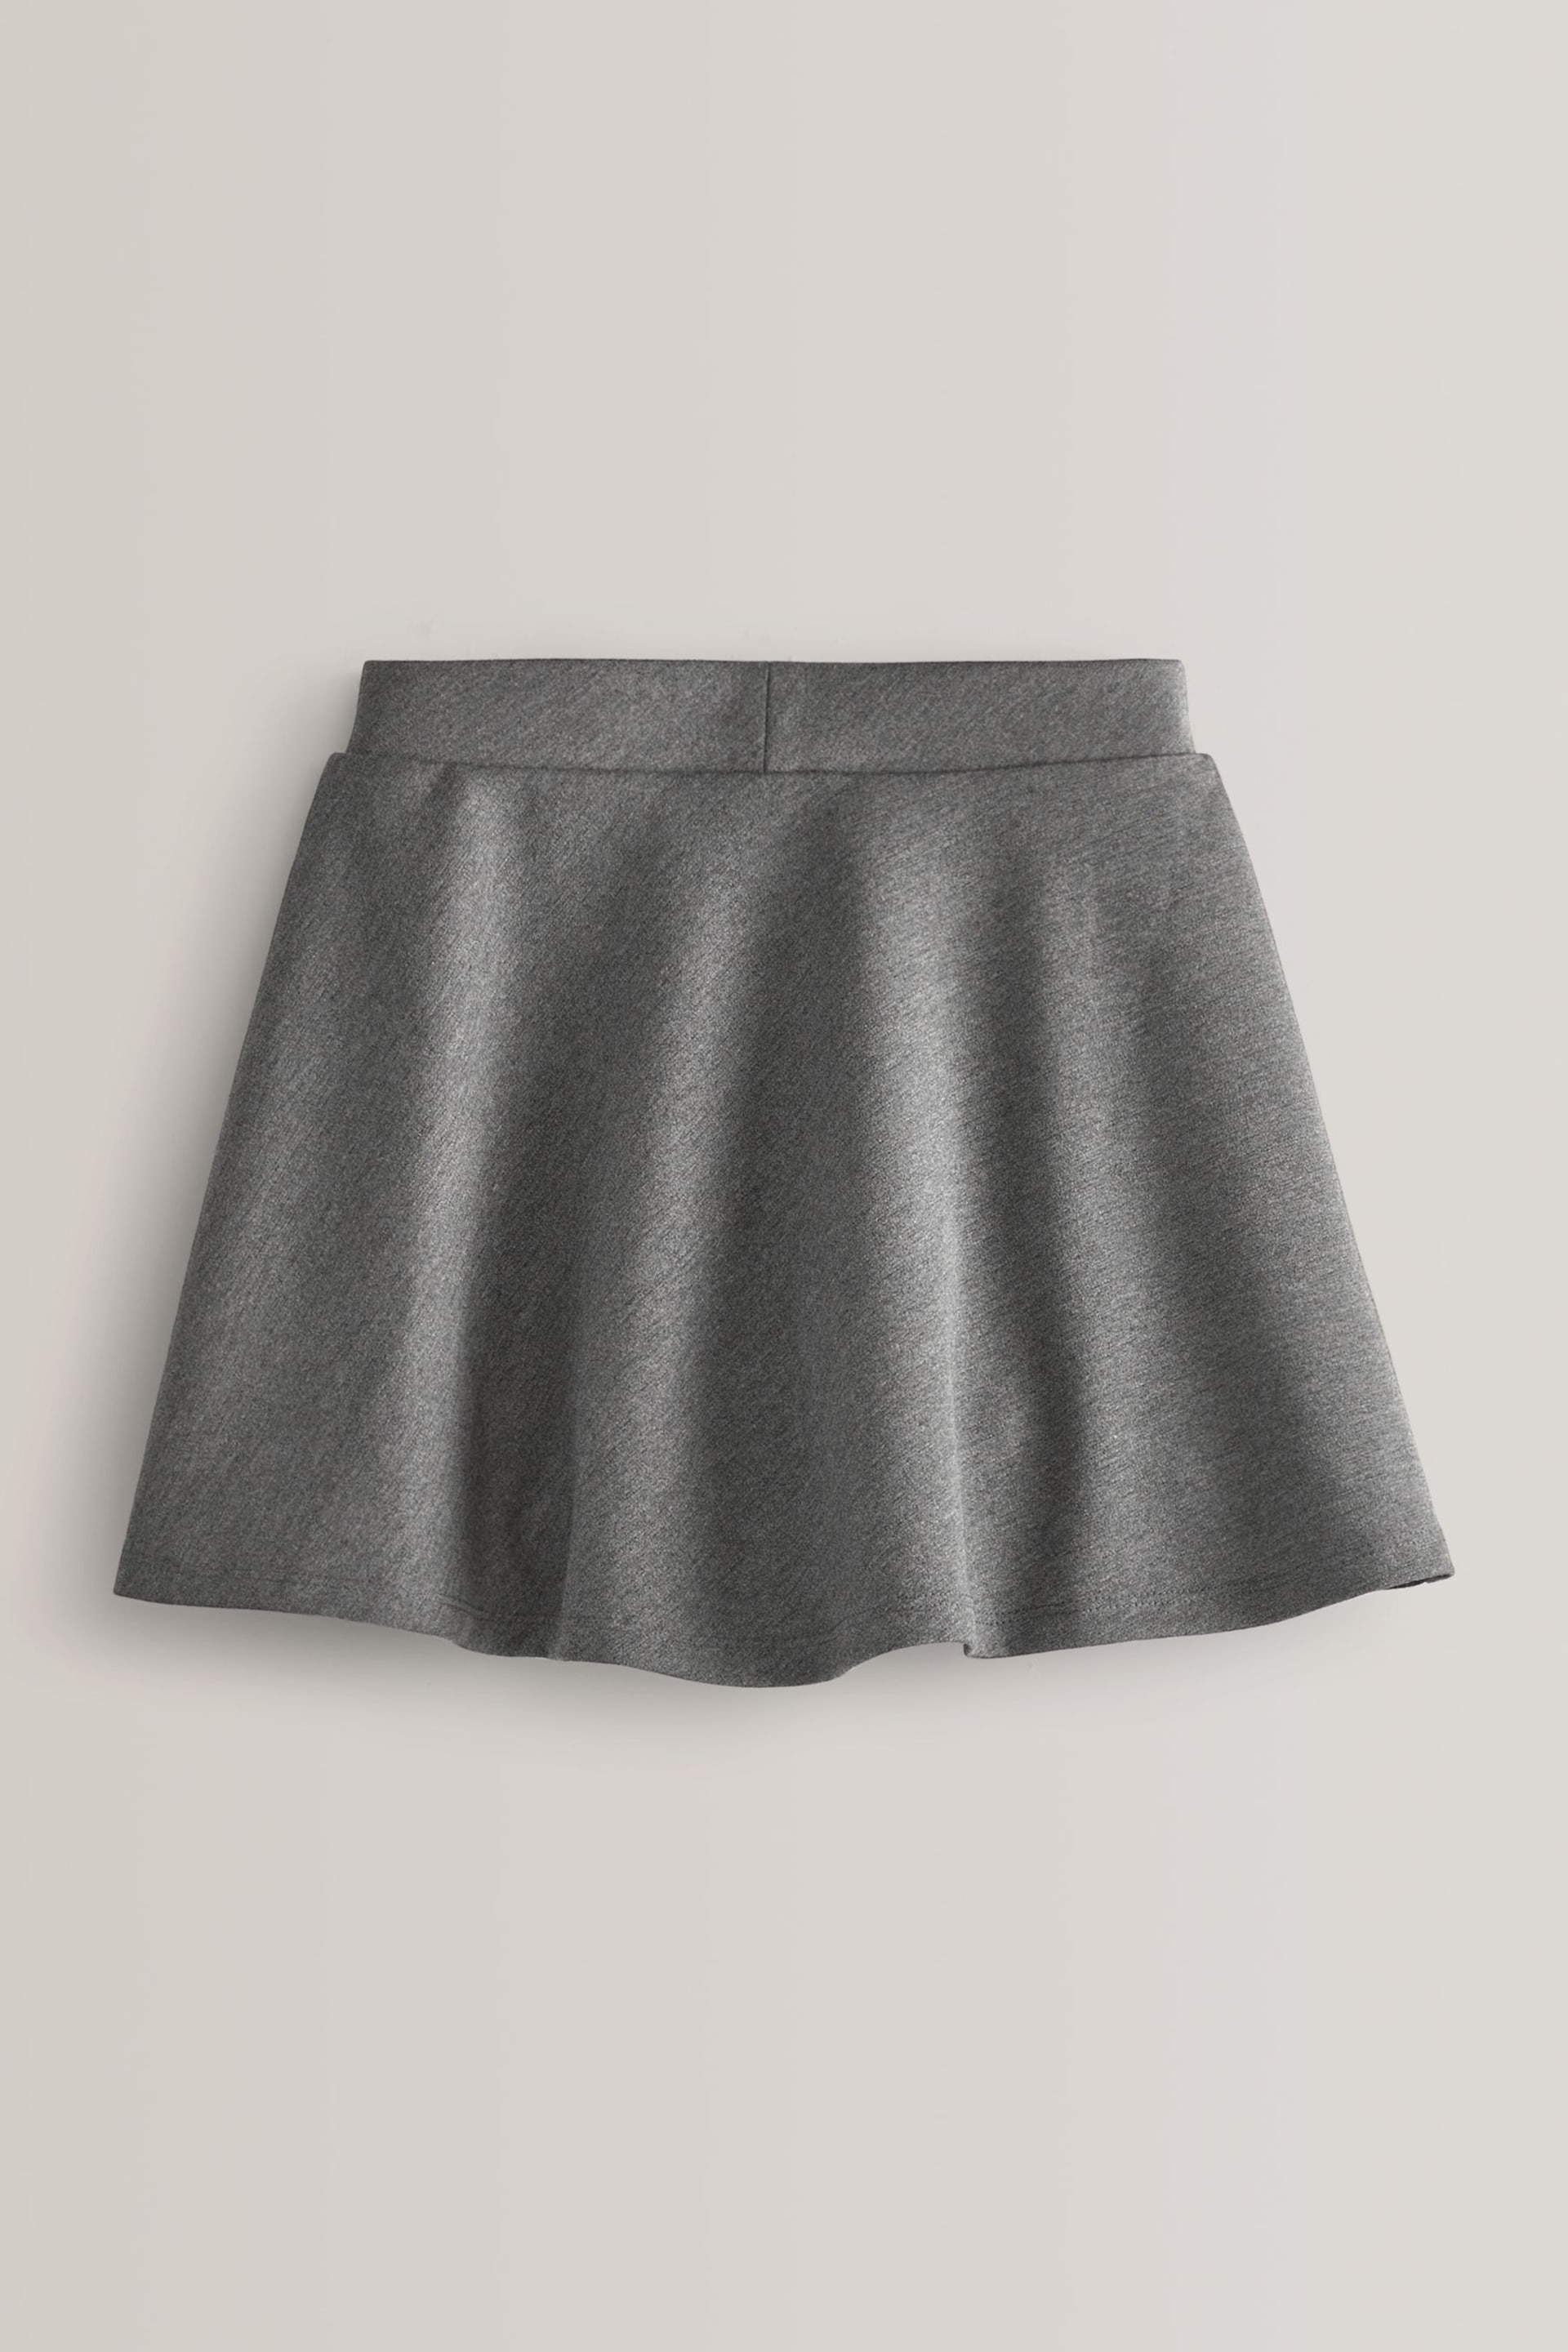 Grey 2 Pack Jersey Stretch Pull-On Waist School Skater Skirts (3-17yrs) - Image 3 of 4